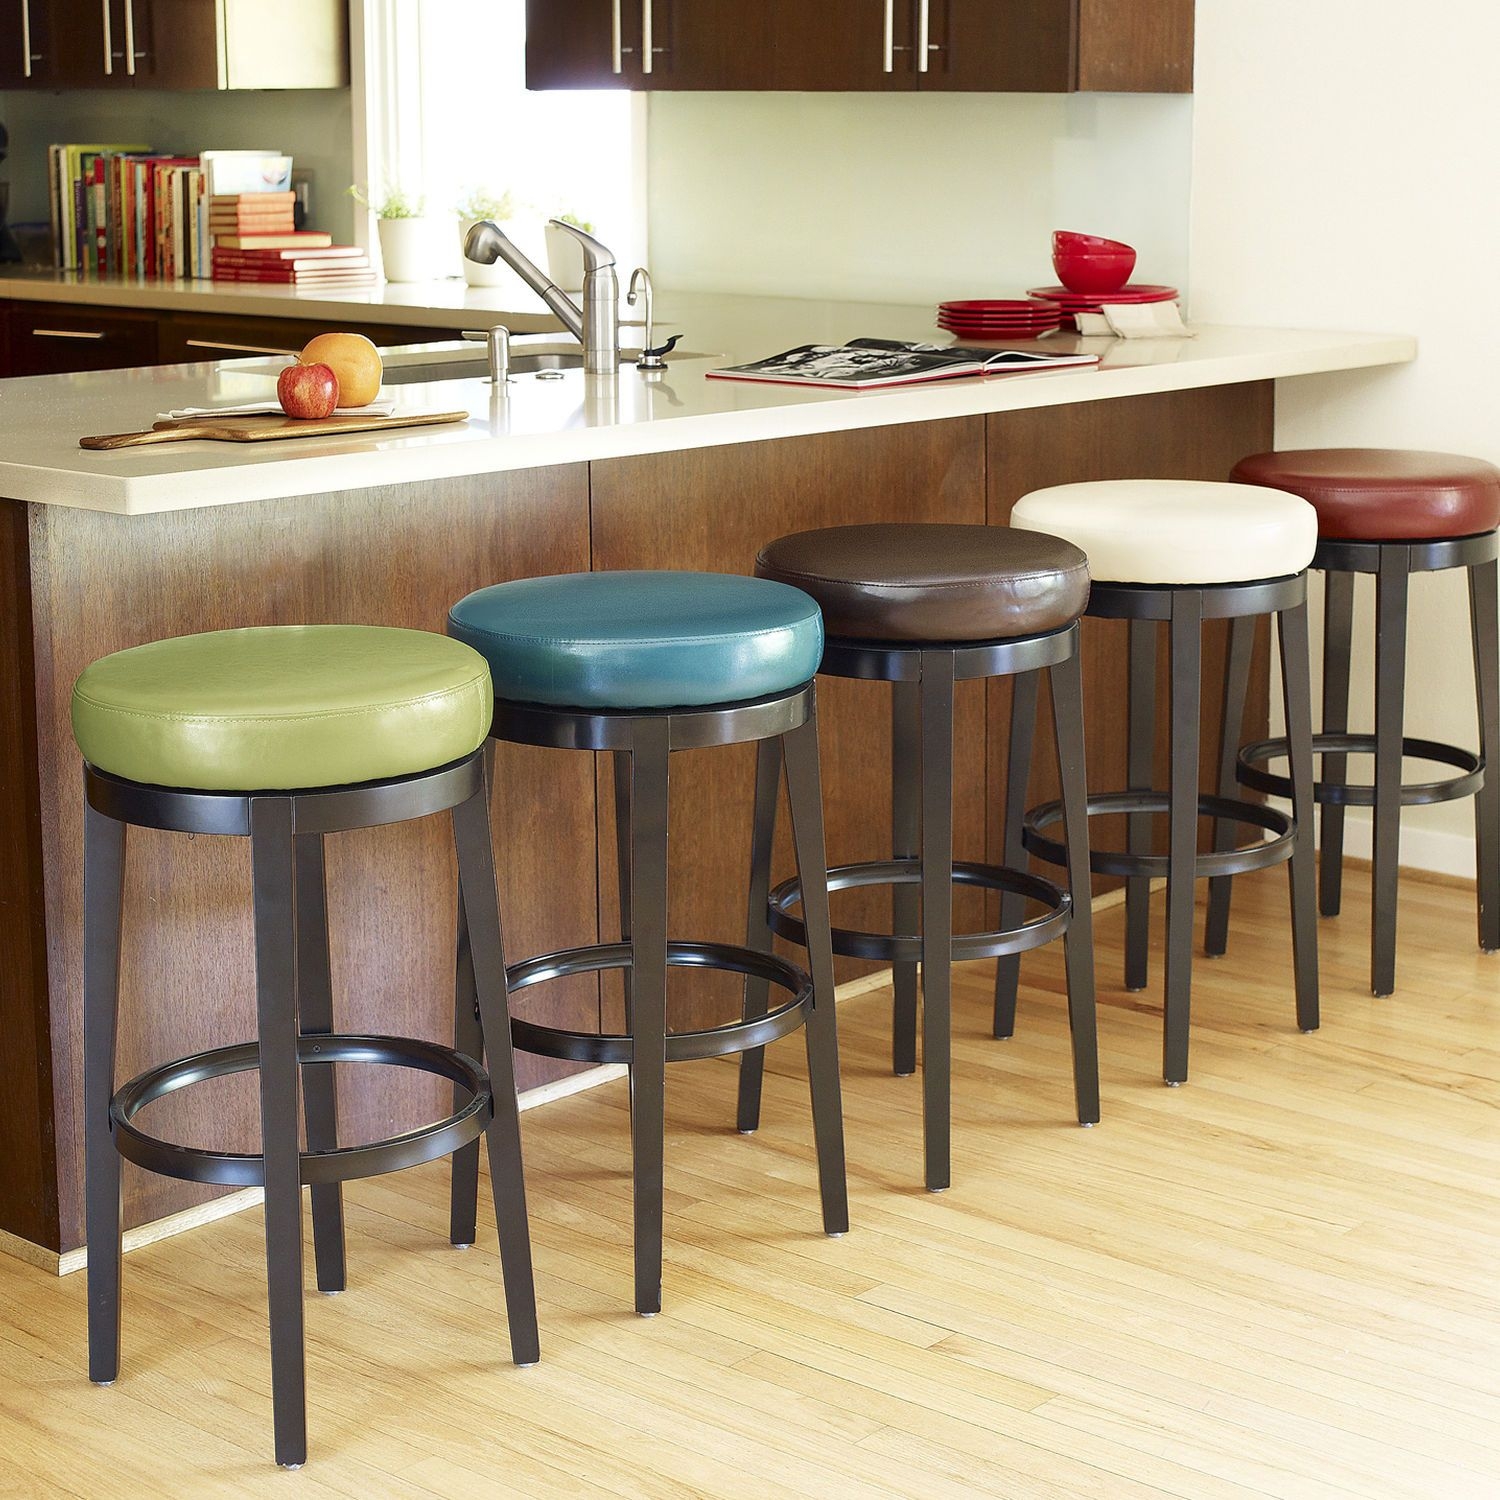 Teal bar stools for kitchen